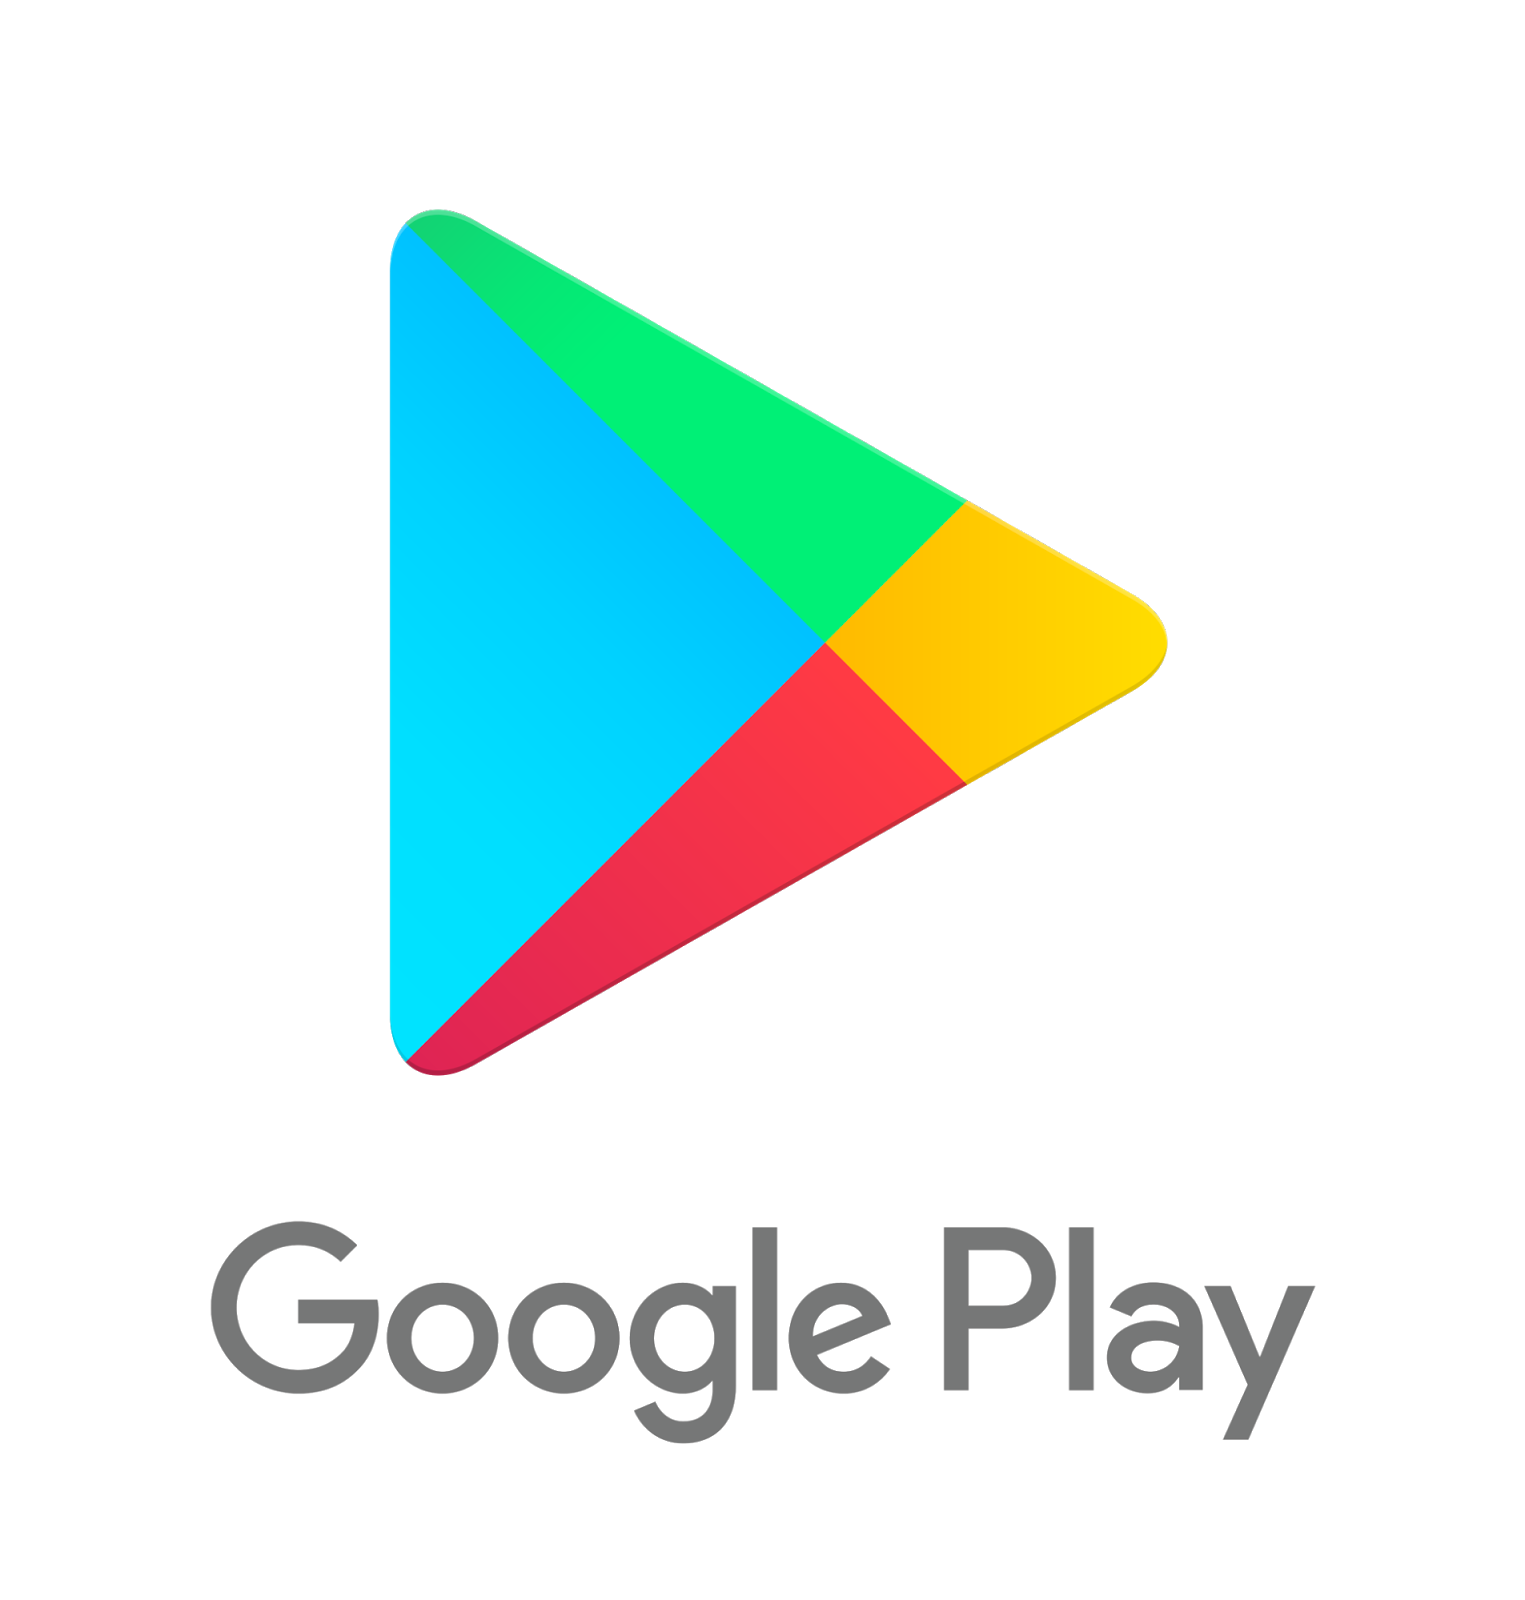 google play store apps